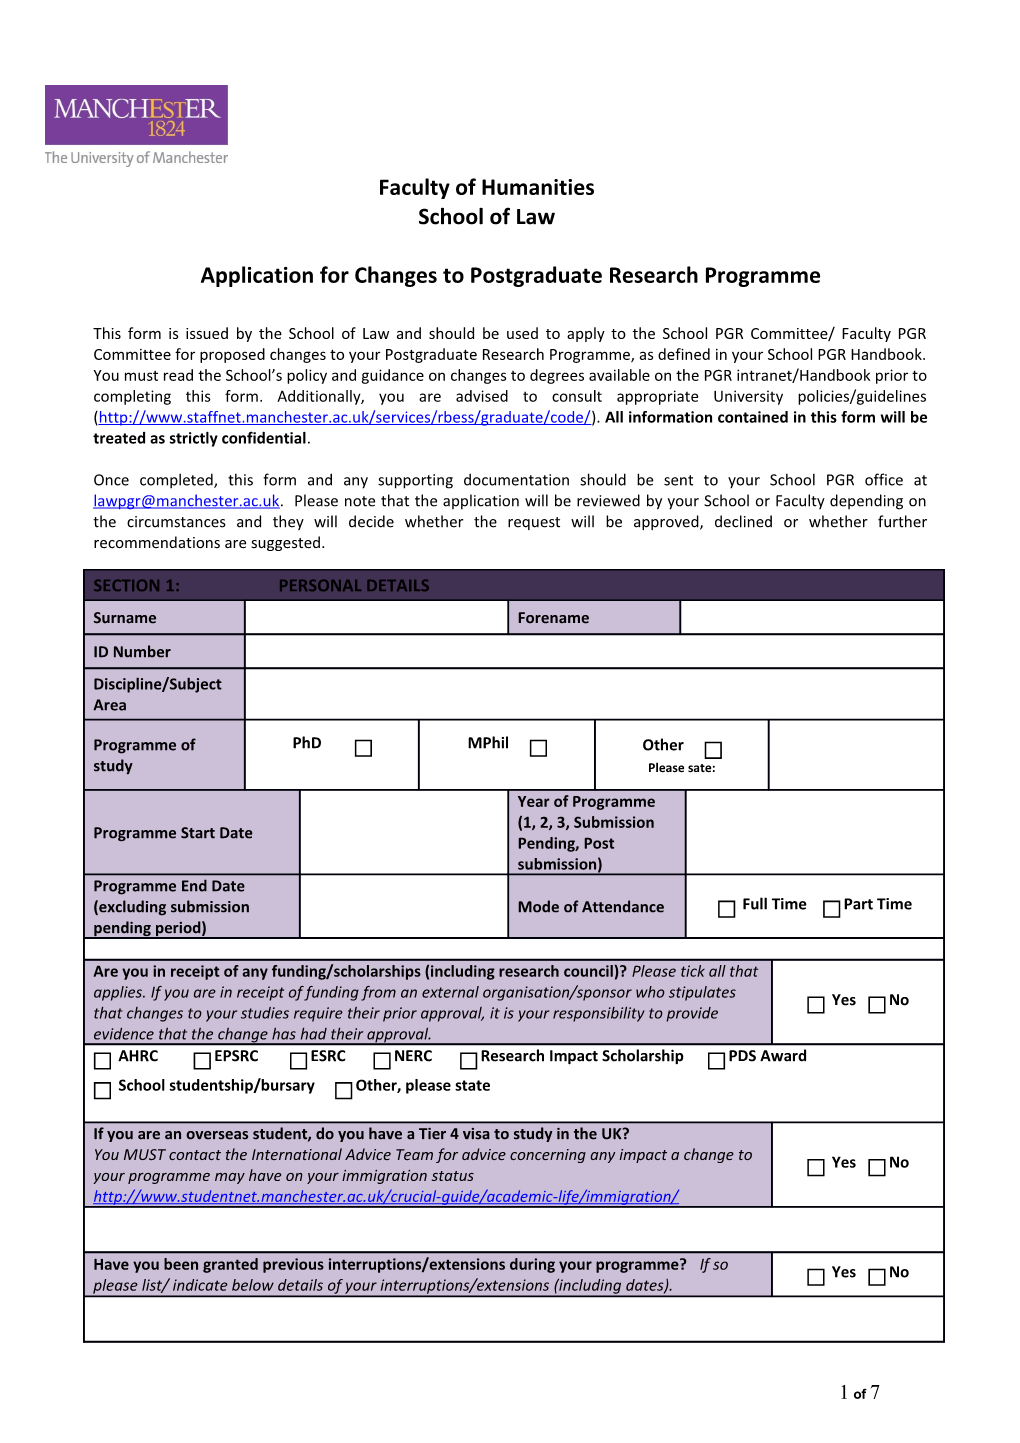 Application for Changes to Postgraduate Research Programme